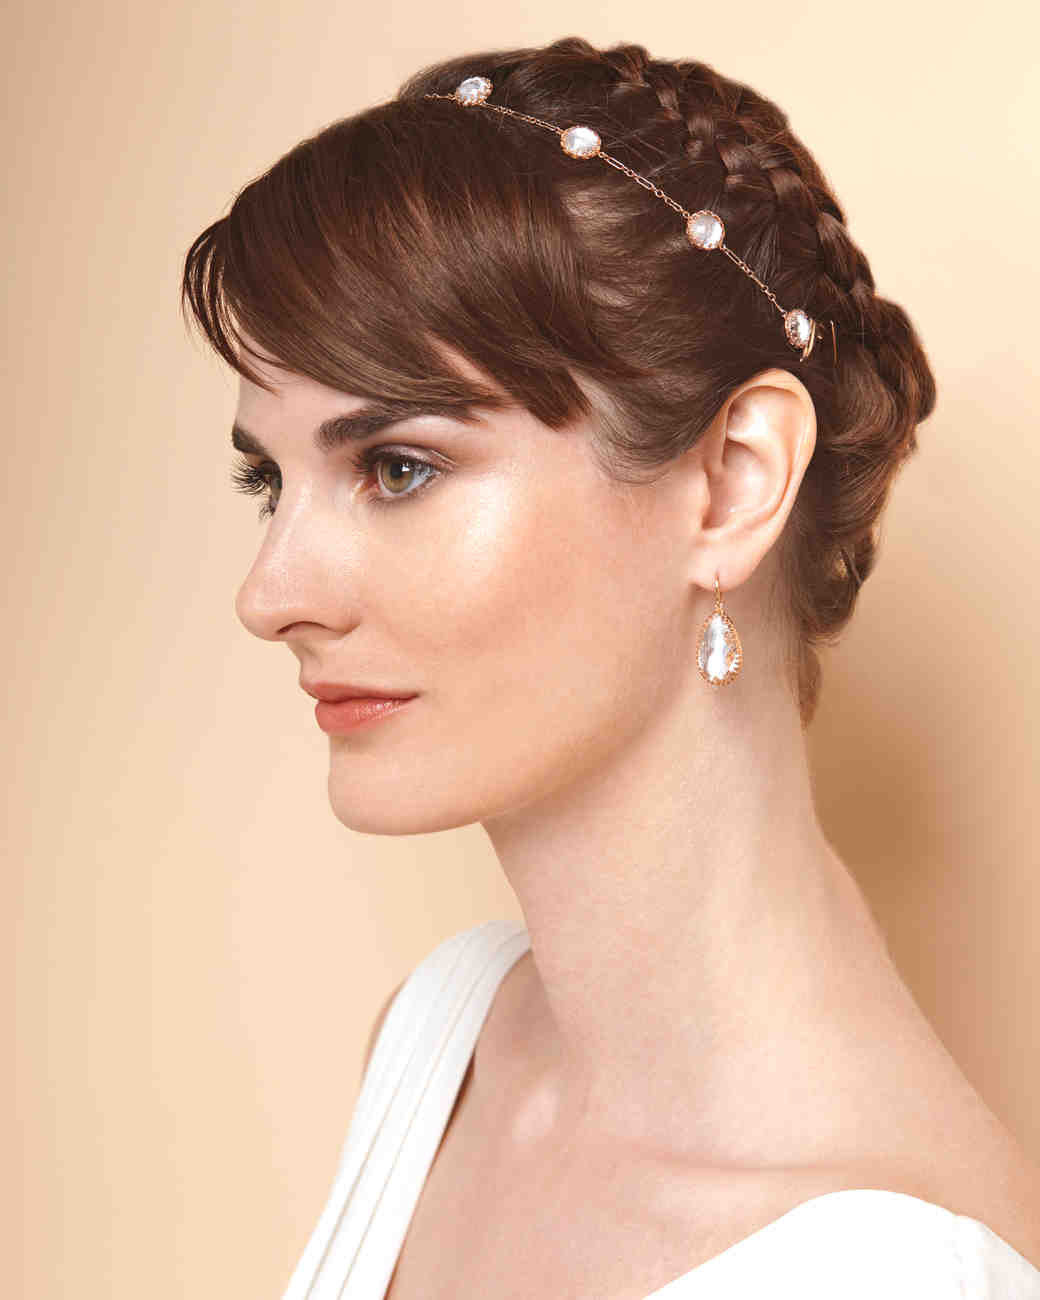 Hairstyles To Wear To A Wedding
 4 Ways to Wear a Short Hairstyle on Your Wedding Day